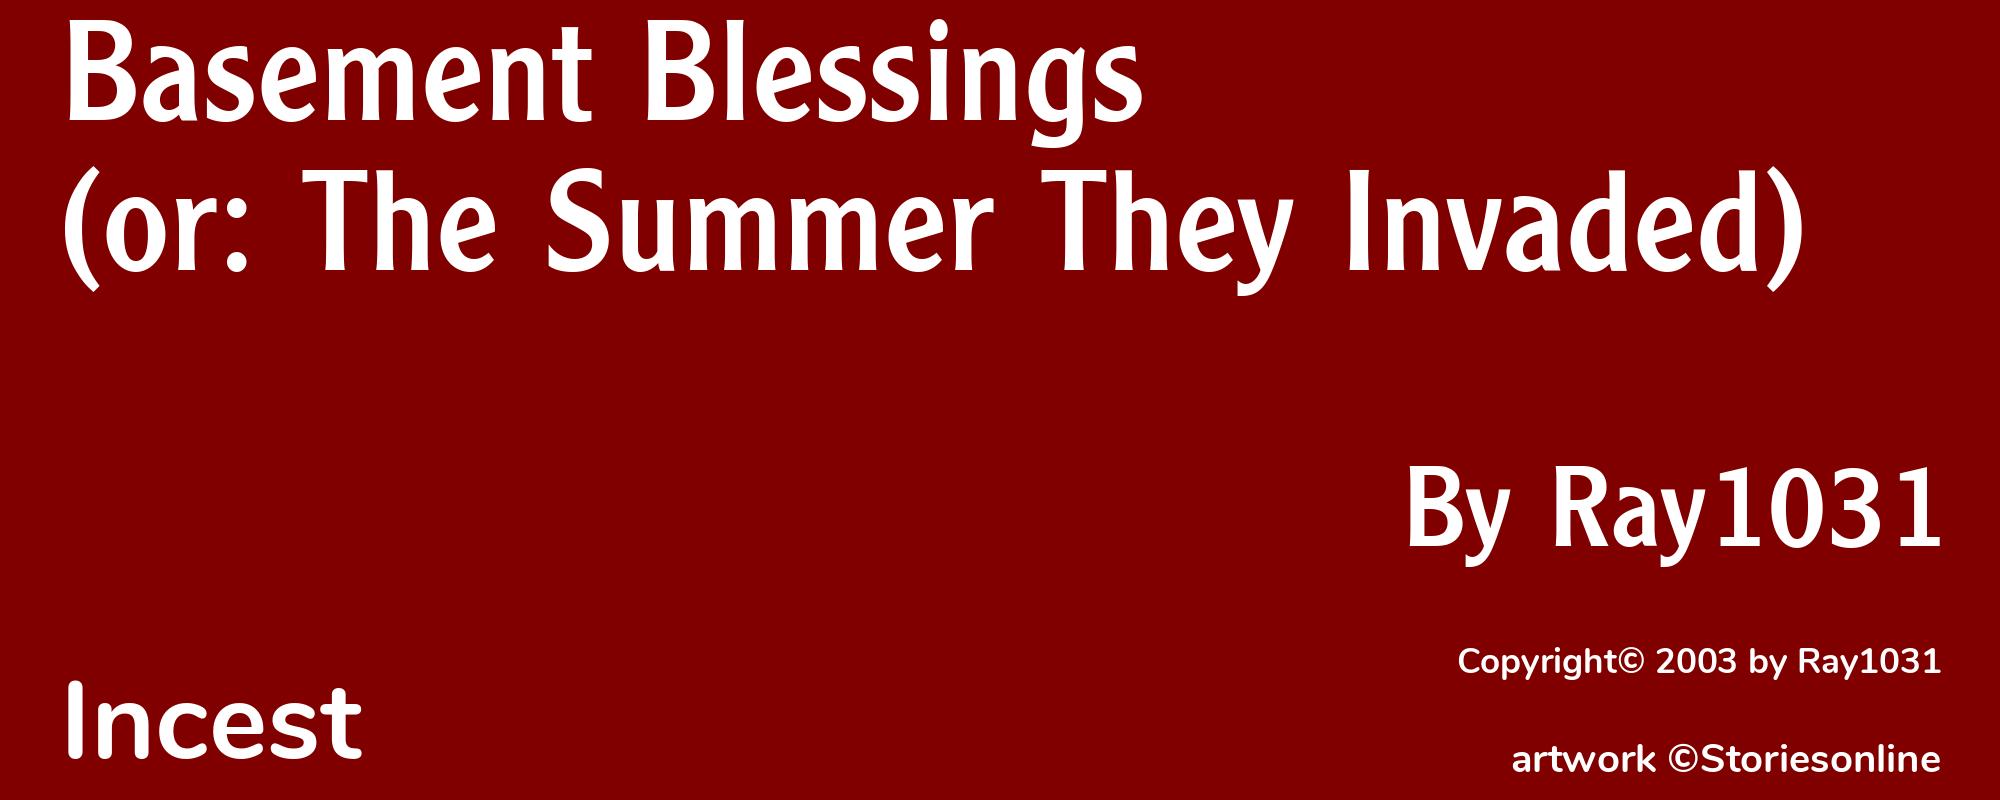 Basement Blessings (or: The Summer They Invaded) - Cover